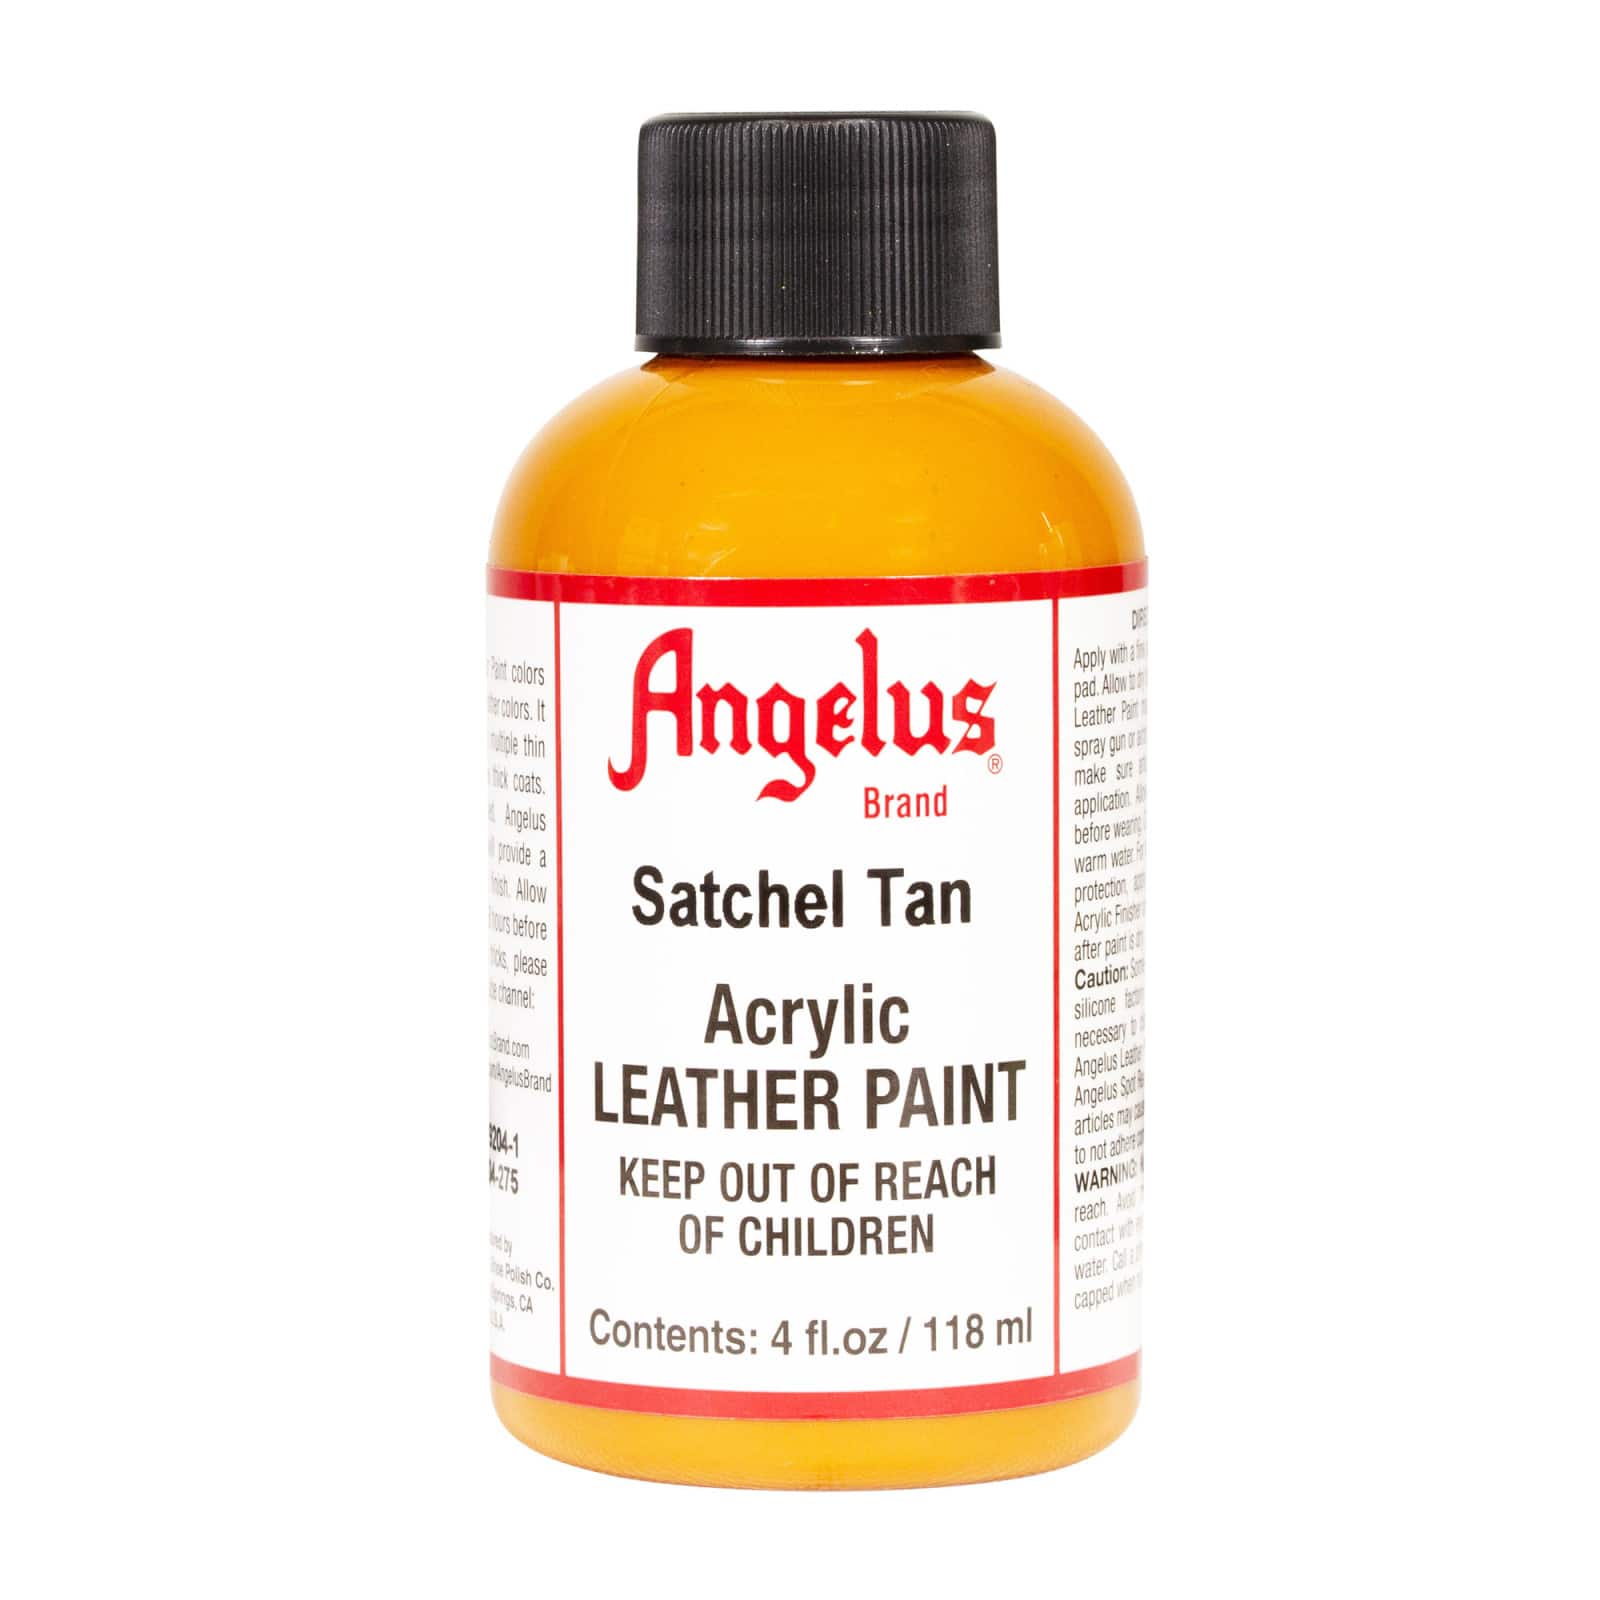 Angelus Brand Acrylic Leather Sneaker Paint 12 Pack Paint Kits 1 Ounce  Bottles